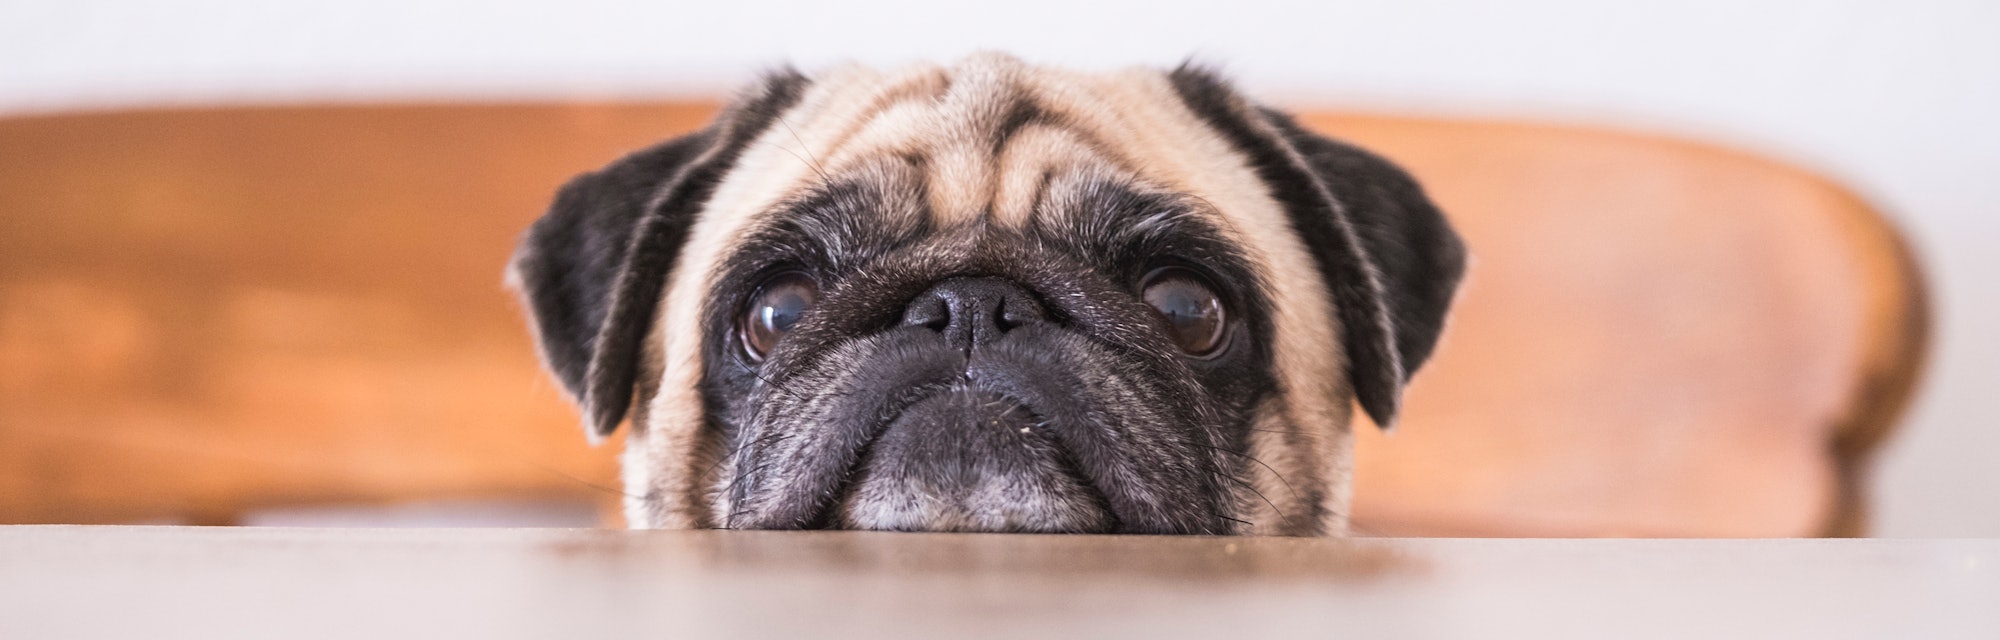 Pug head leaning on tabletop looking straight at camera